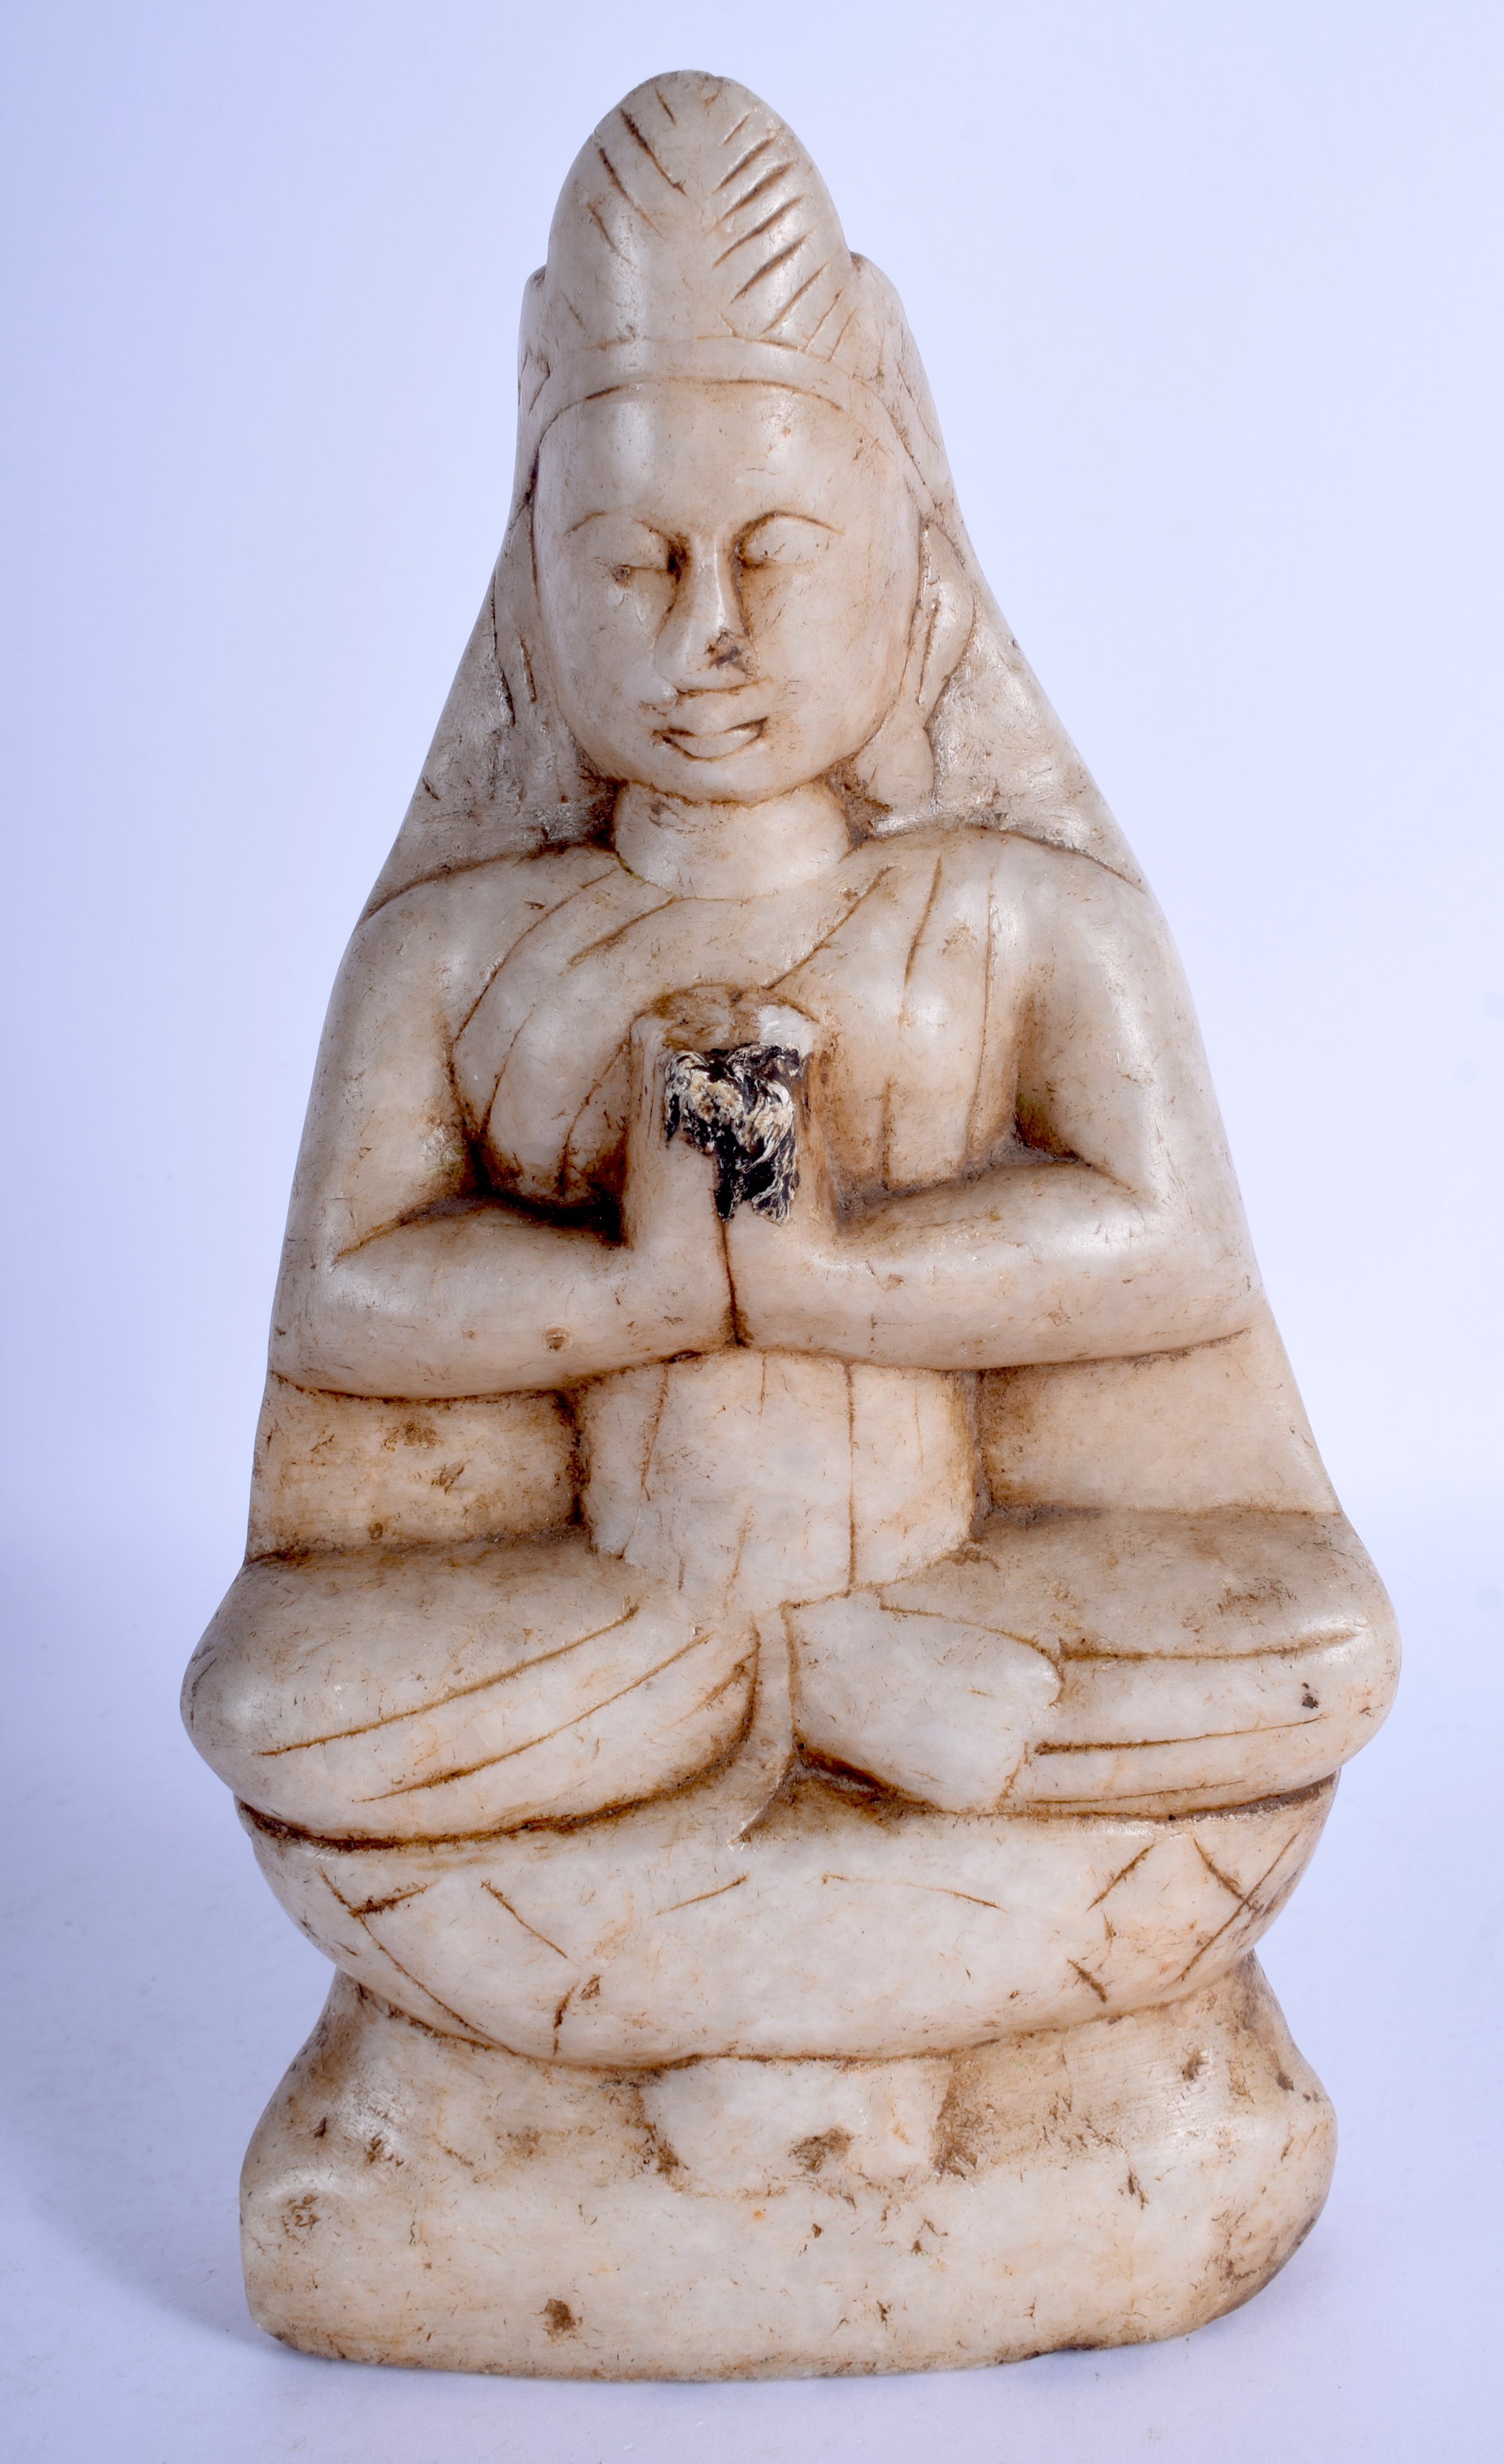 AN 18TH/19TH CENTURY INDIAN ASIAN CARVED MARBLE FIGURE OF A BUDDHISTIC DEITY modelled seated. 26 cm